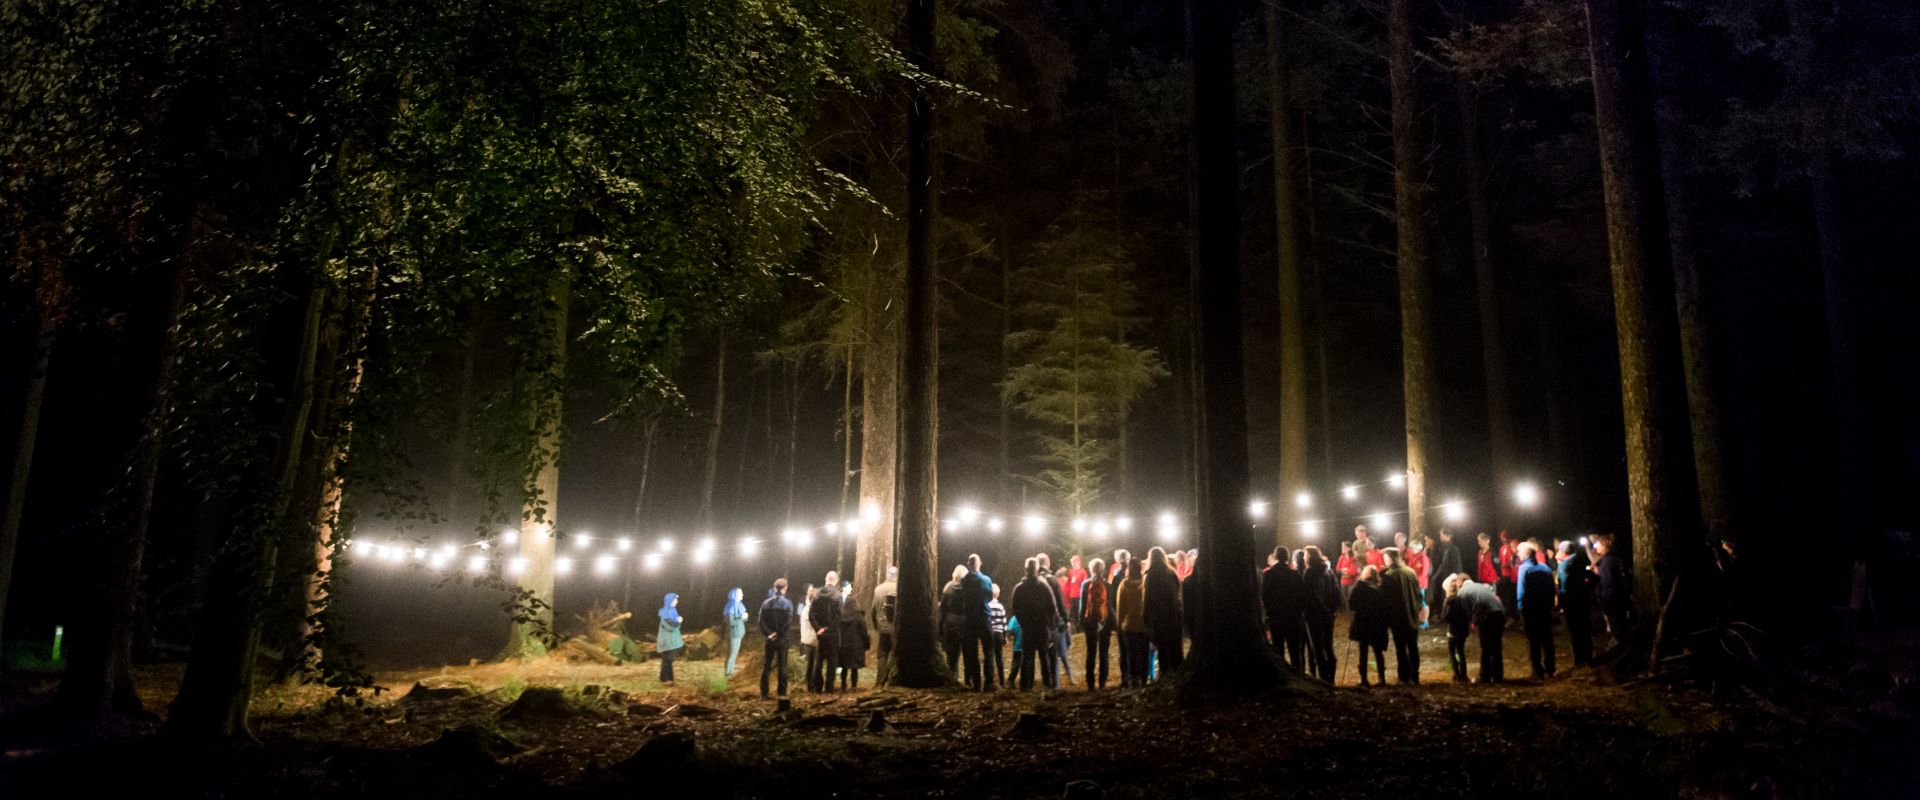 The audience in the first at night, gathered amongst the trees, illuminated by the festoon lighting that hangs above them.